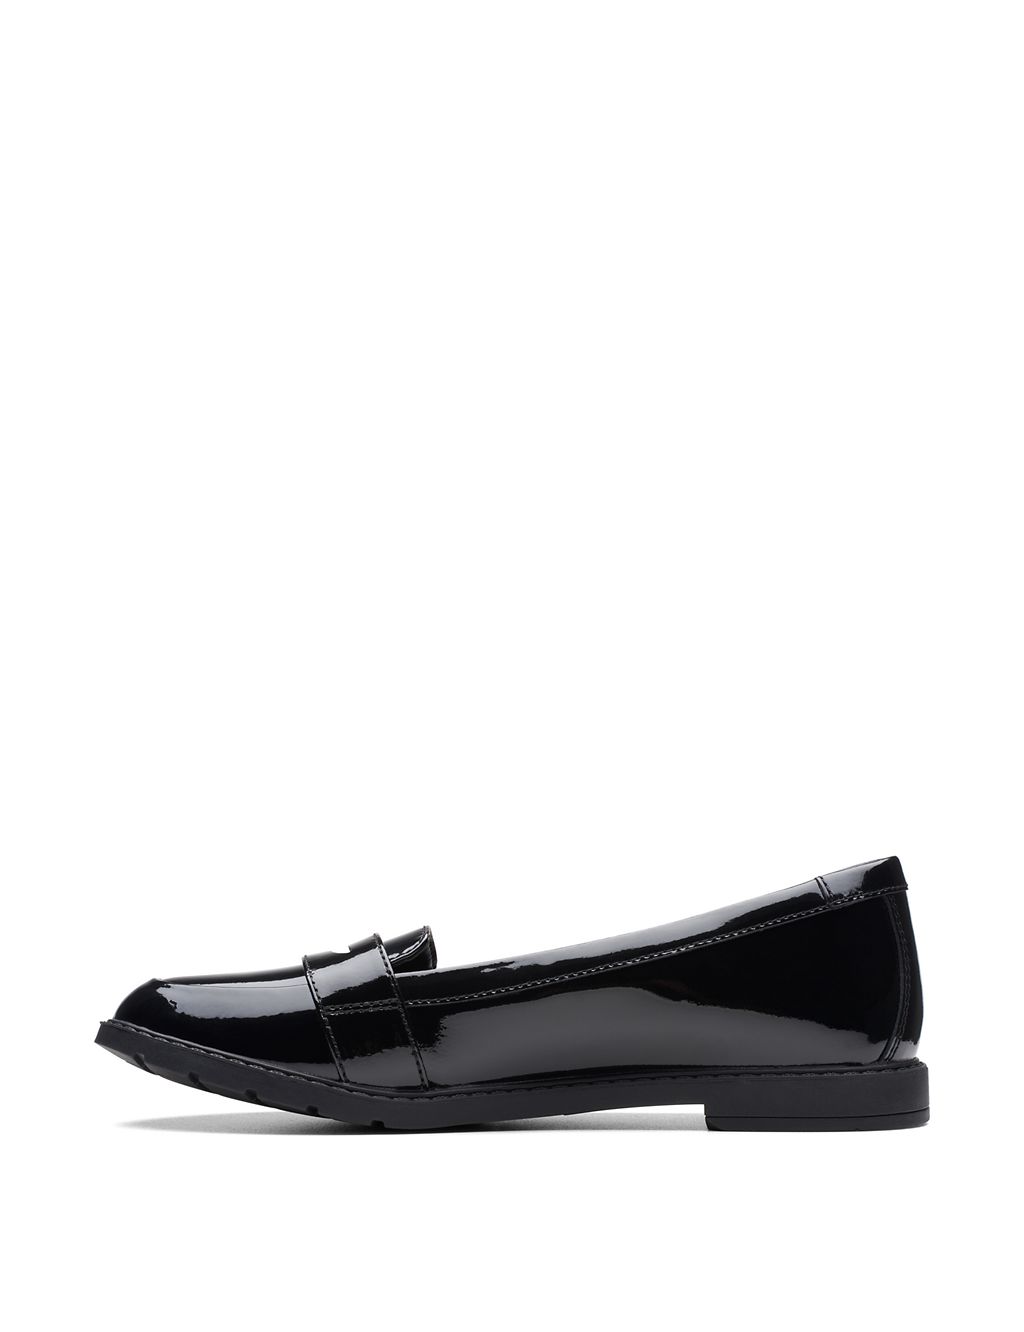 Kids' Patent Leather Slip-On Loafers (3 Small - 8 Small) 4 of 7